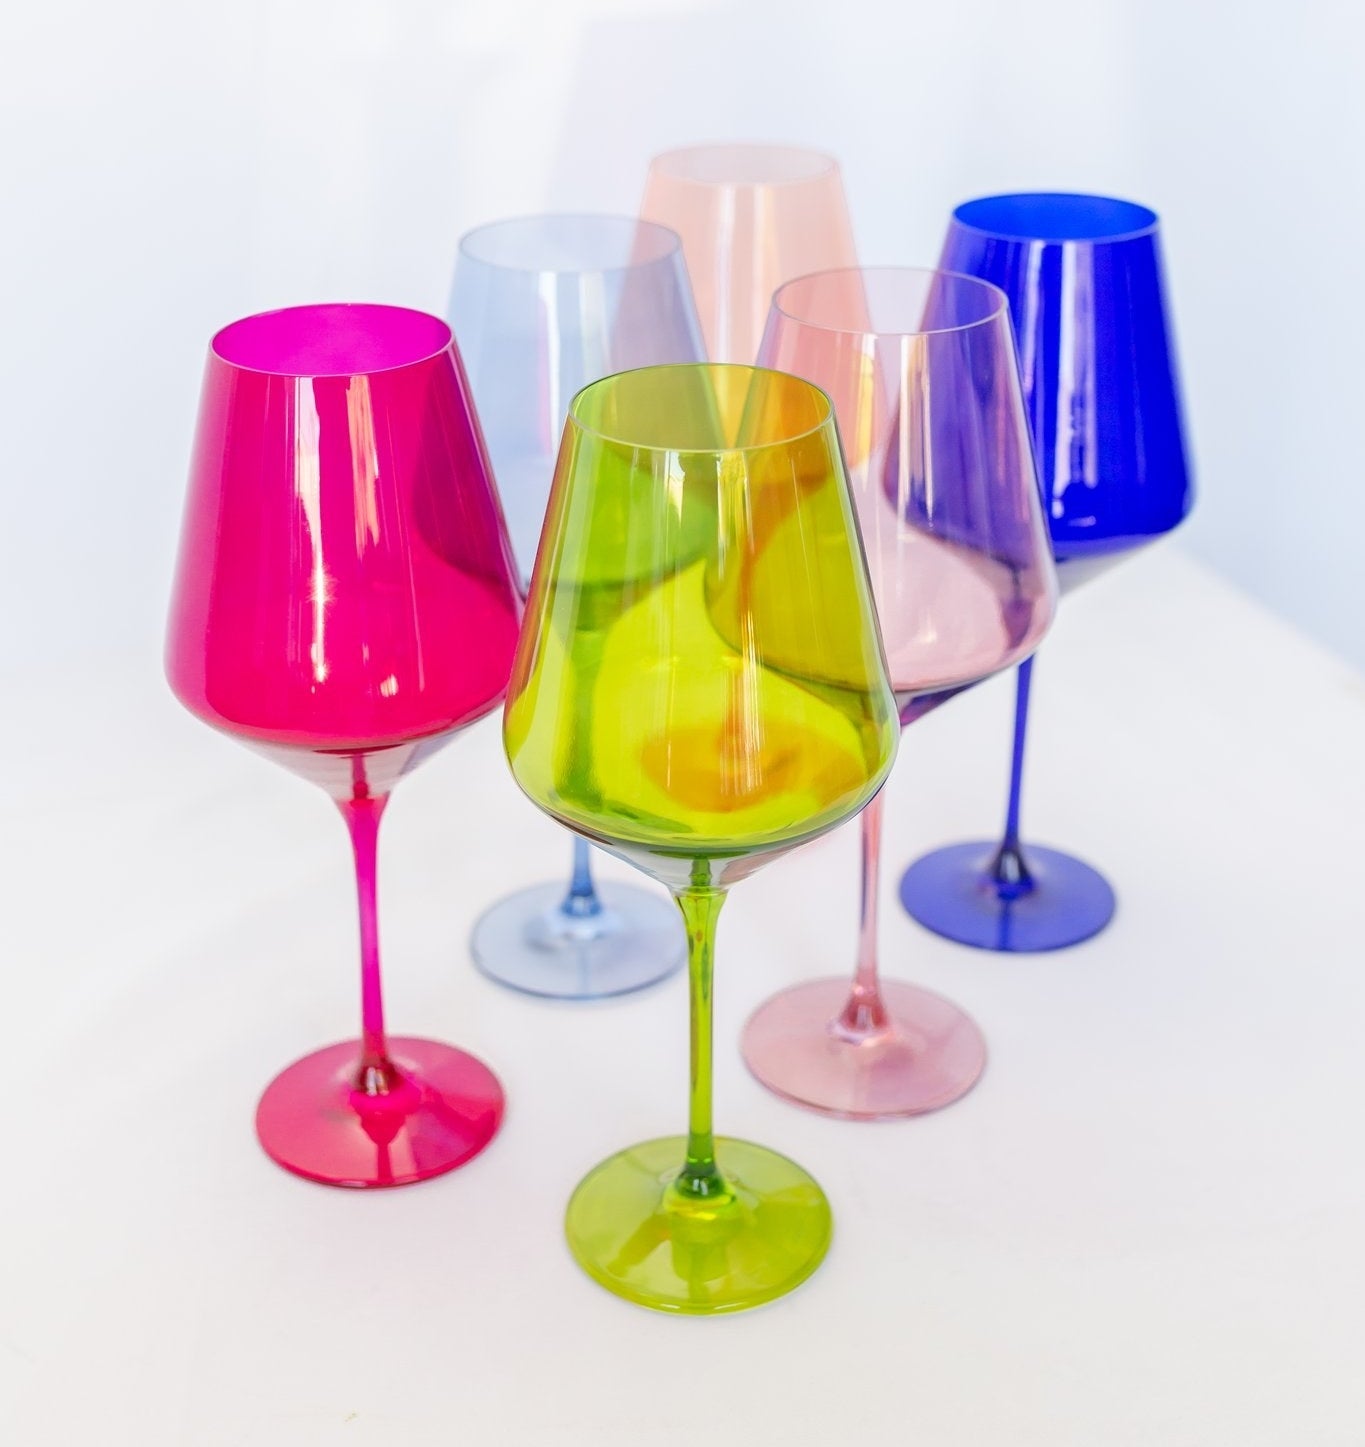 six wine glasses in different colors including hot pink, lime green, light pink, lavender, blue, and light blue